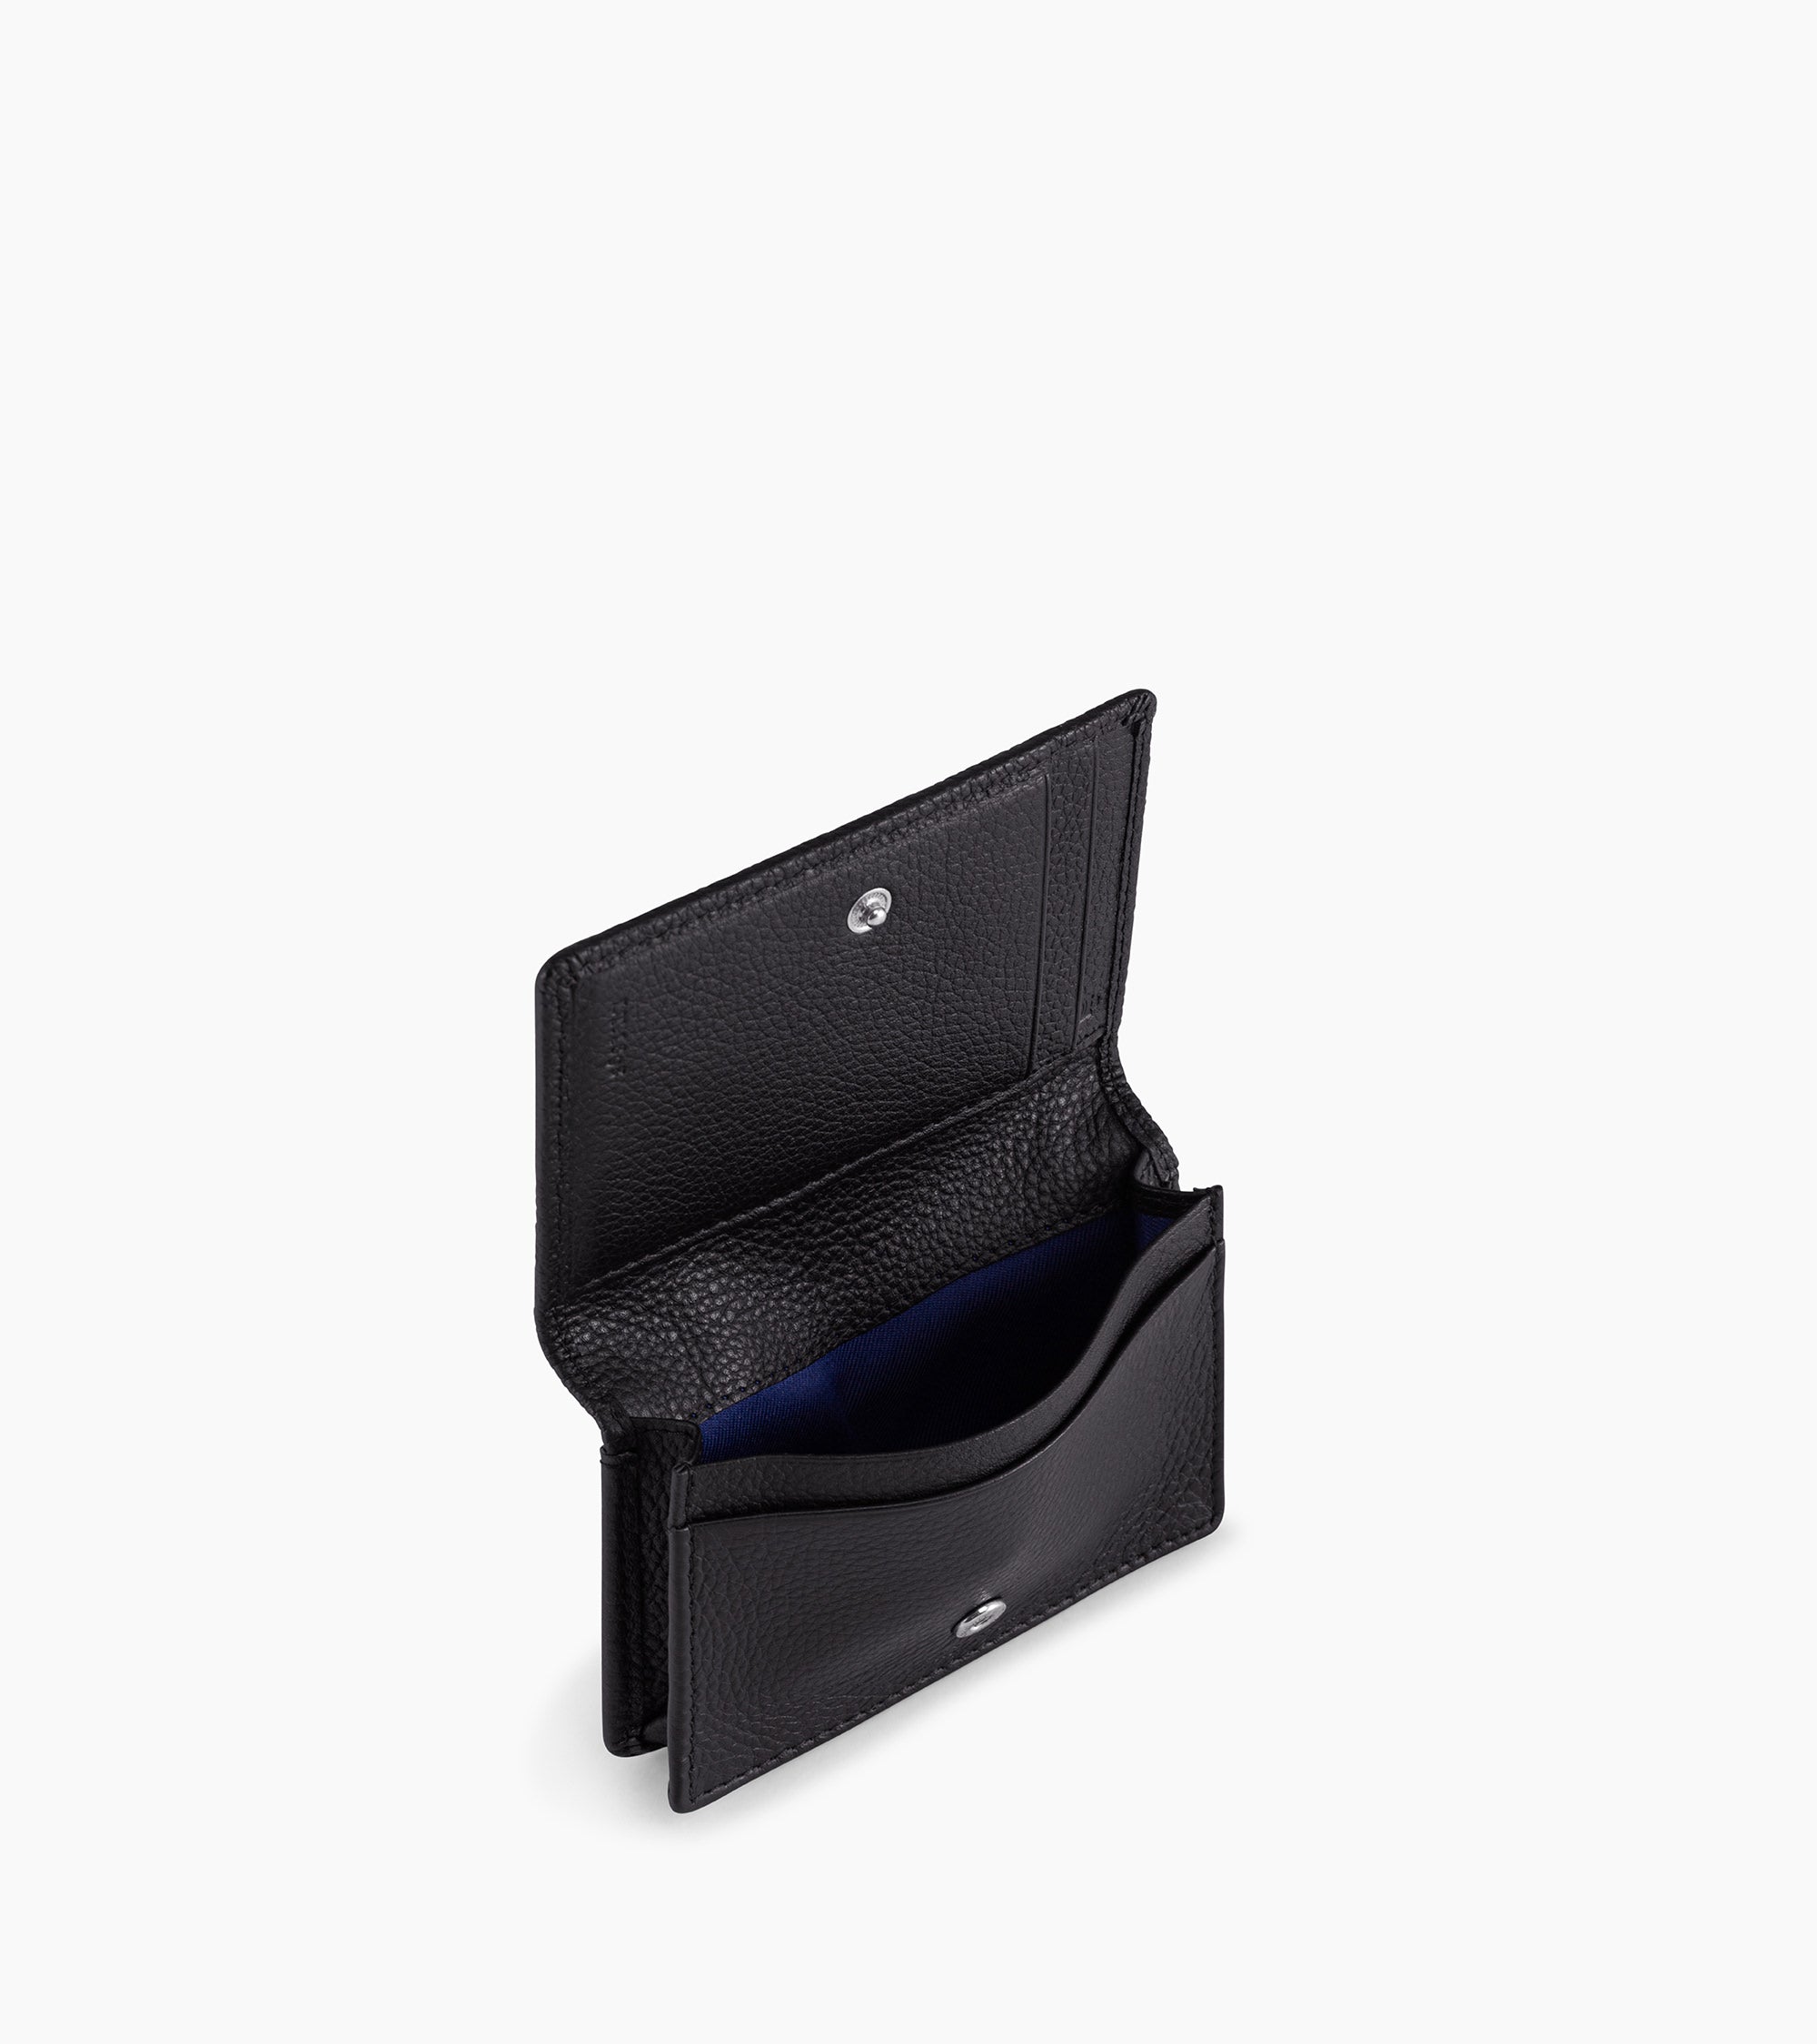 Charles card holder in grained leather